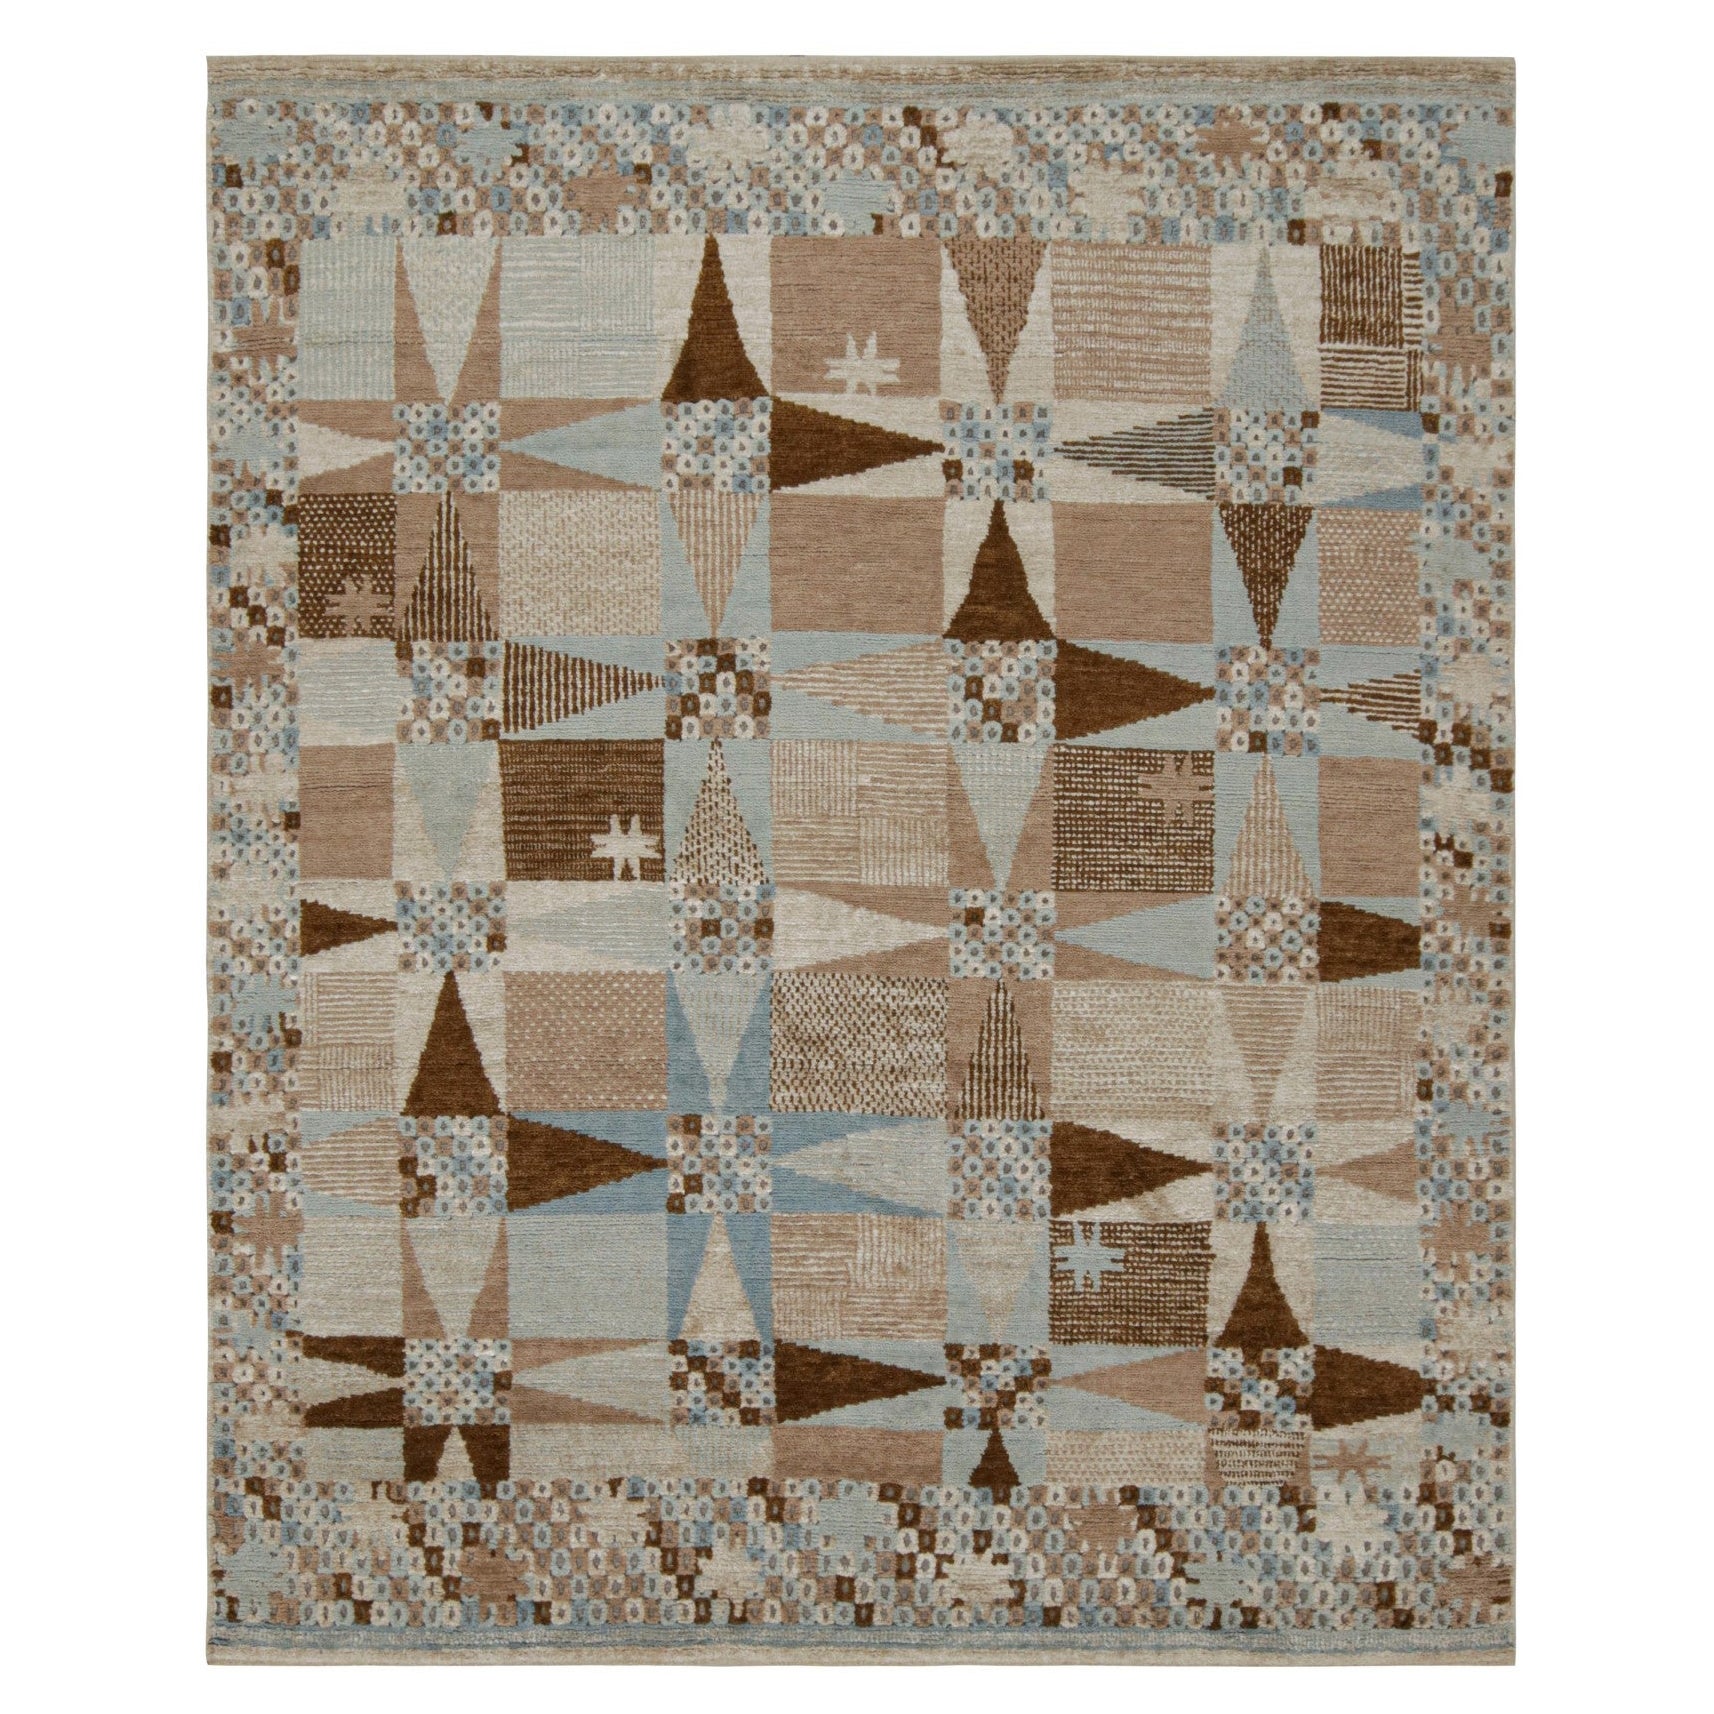 Rug & Kilim’s Oushak Style Rug with Geometric Patterns in Brown and Rust Tones For Sale